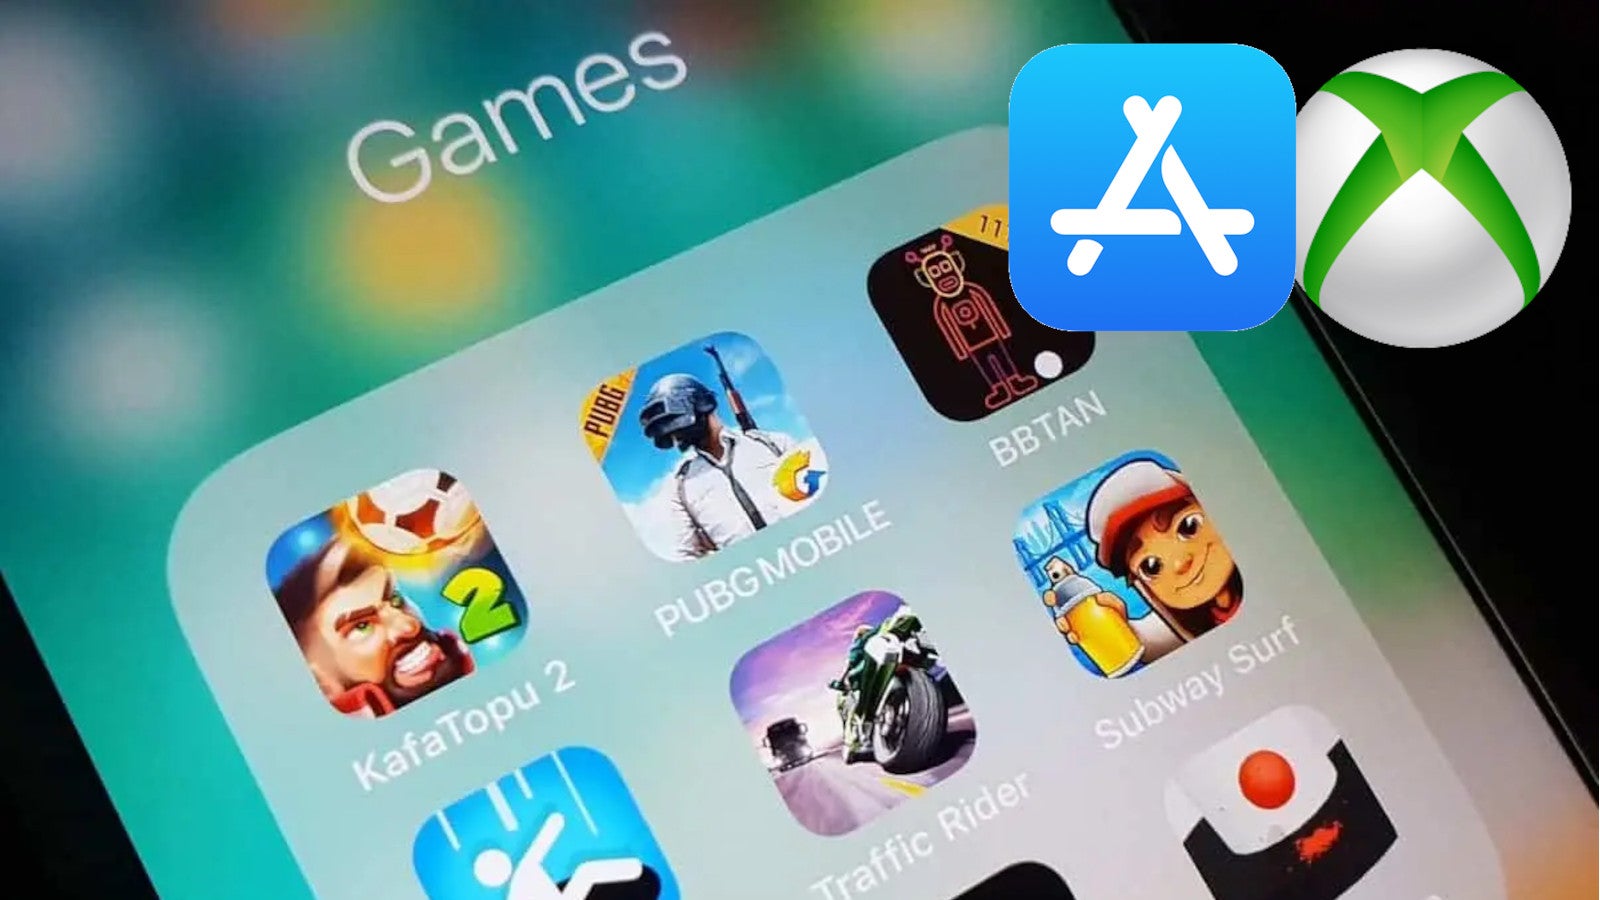 the appstore